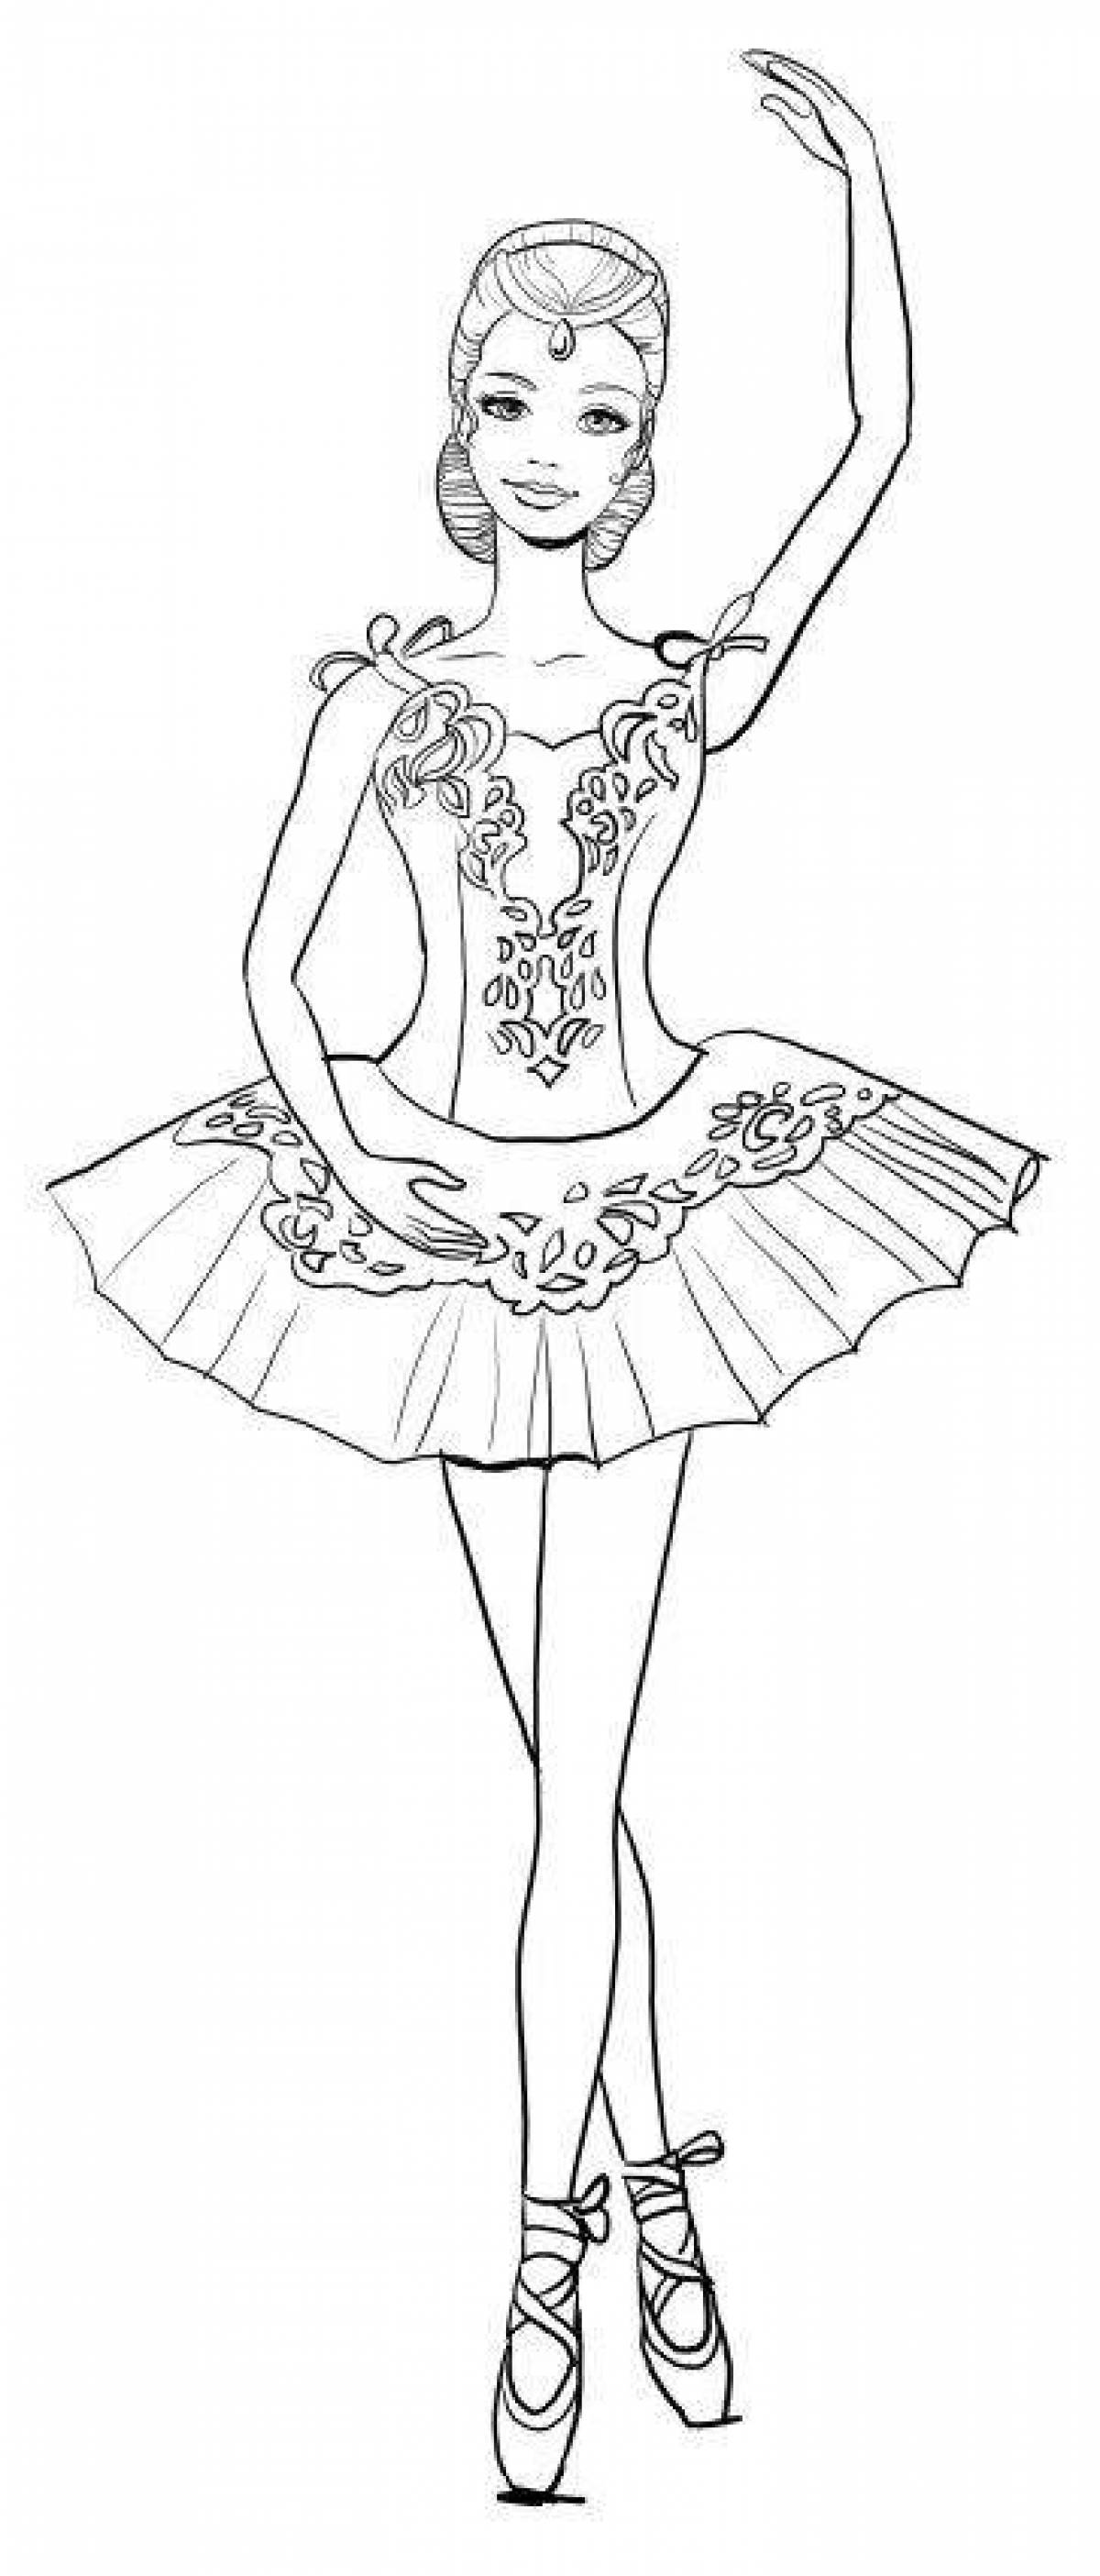 Coloring page dazzling ballerina for girls